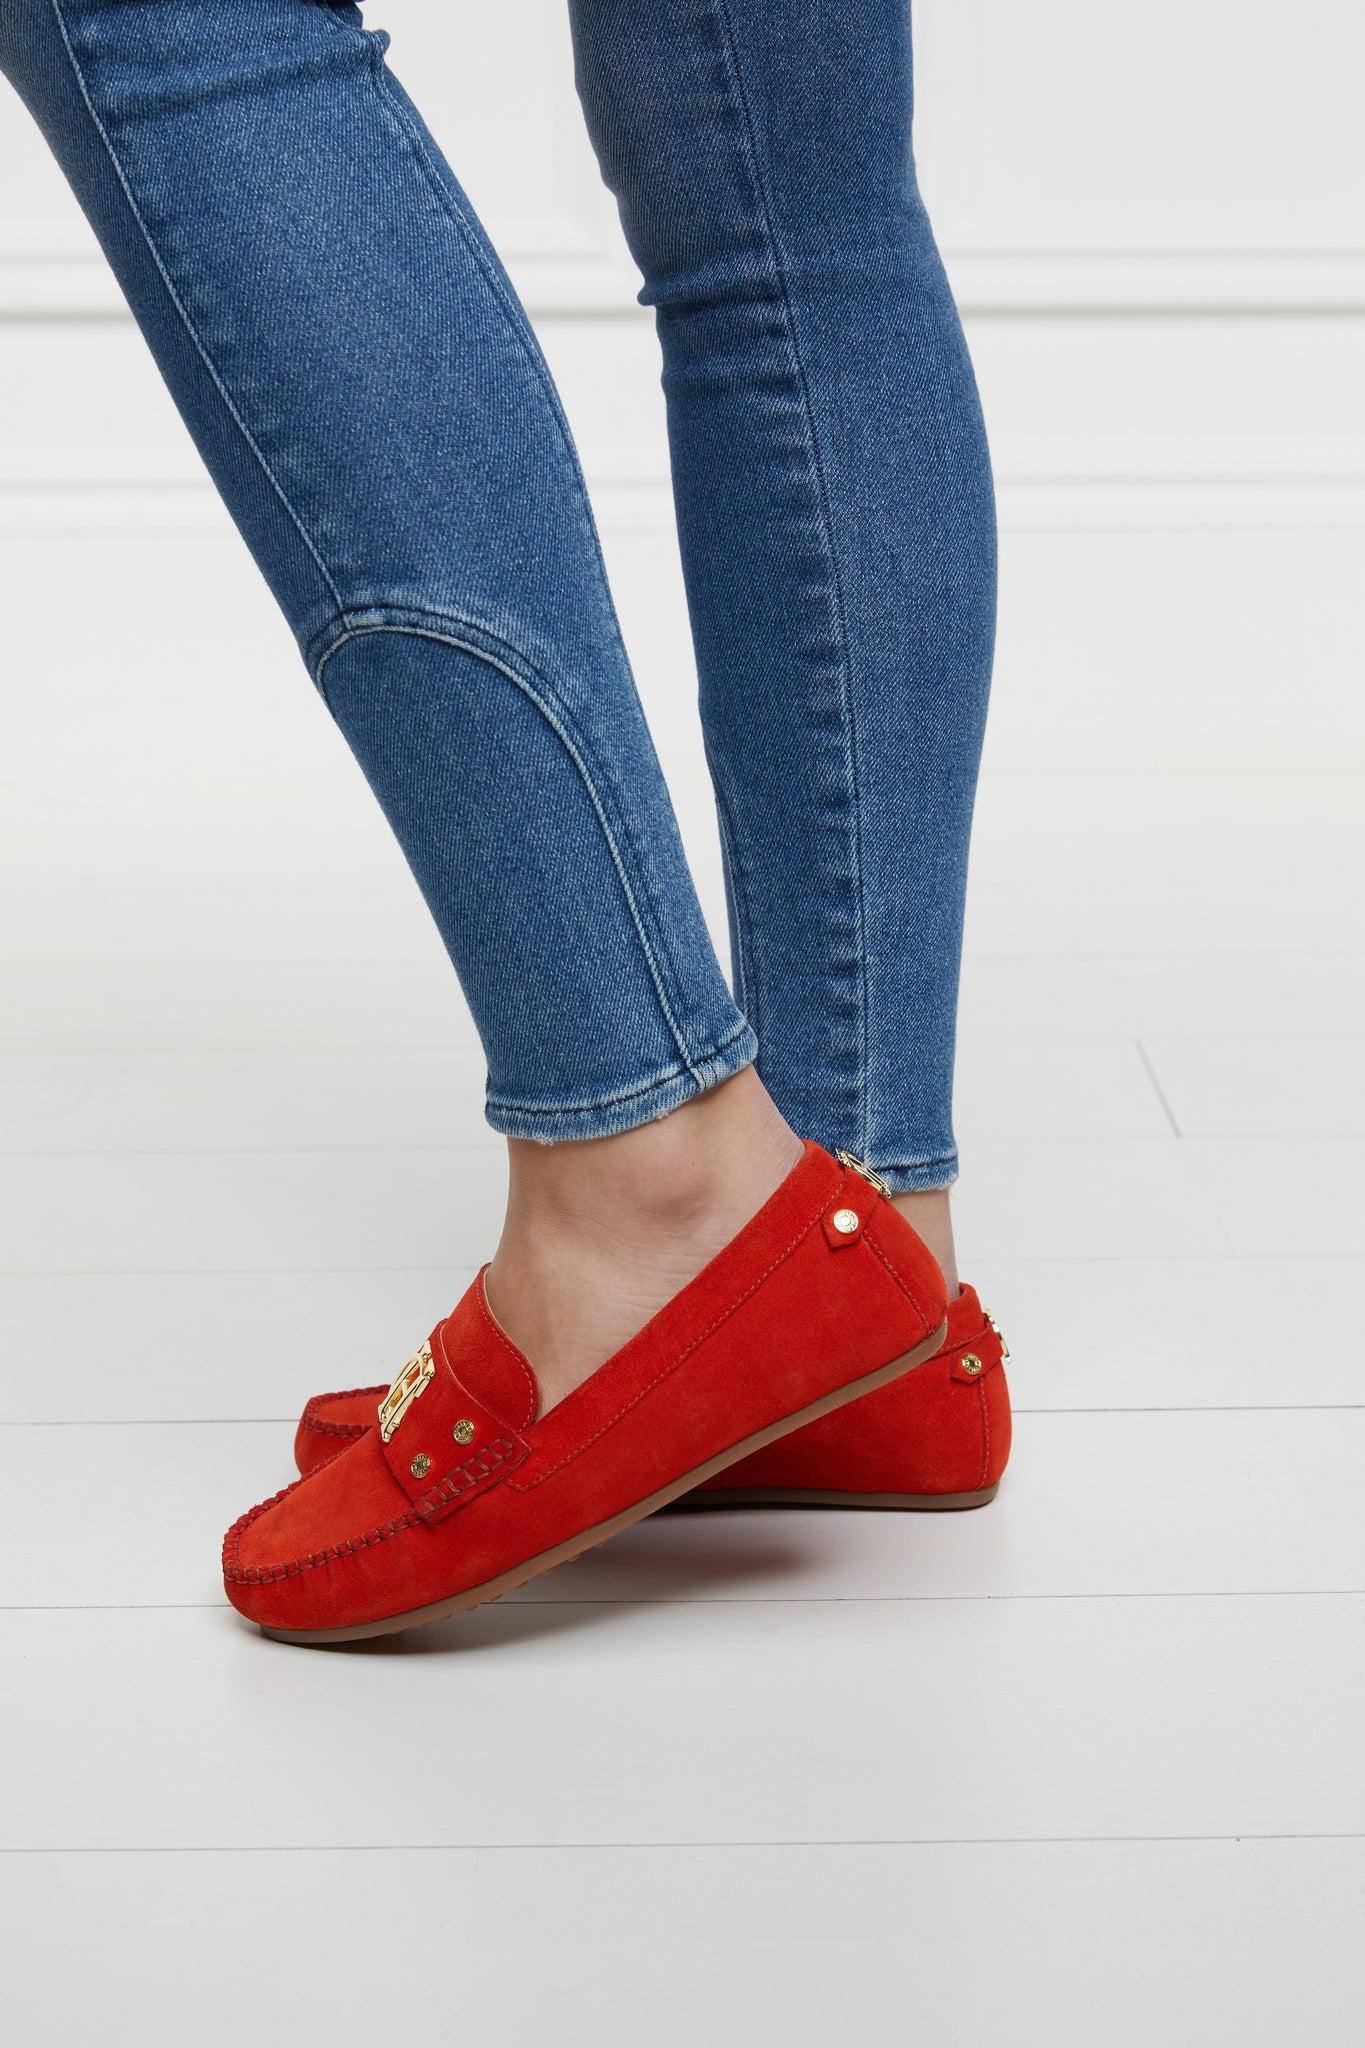 side view of orange suede loafers with a leather sole and top stitching details and gold hardware paired with denim jeans